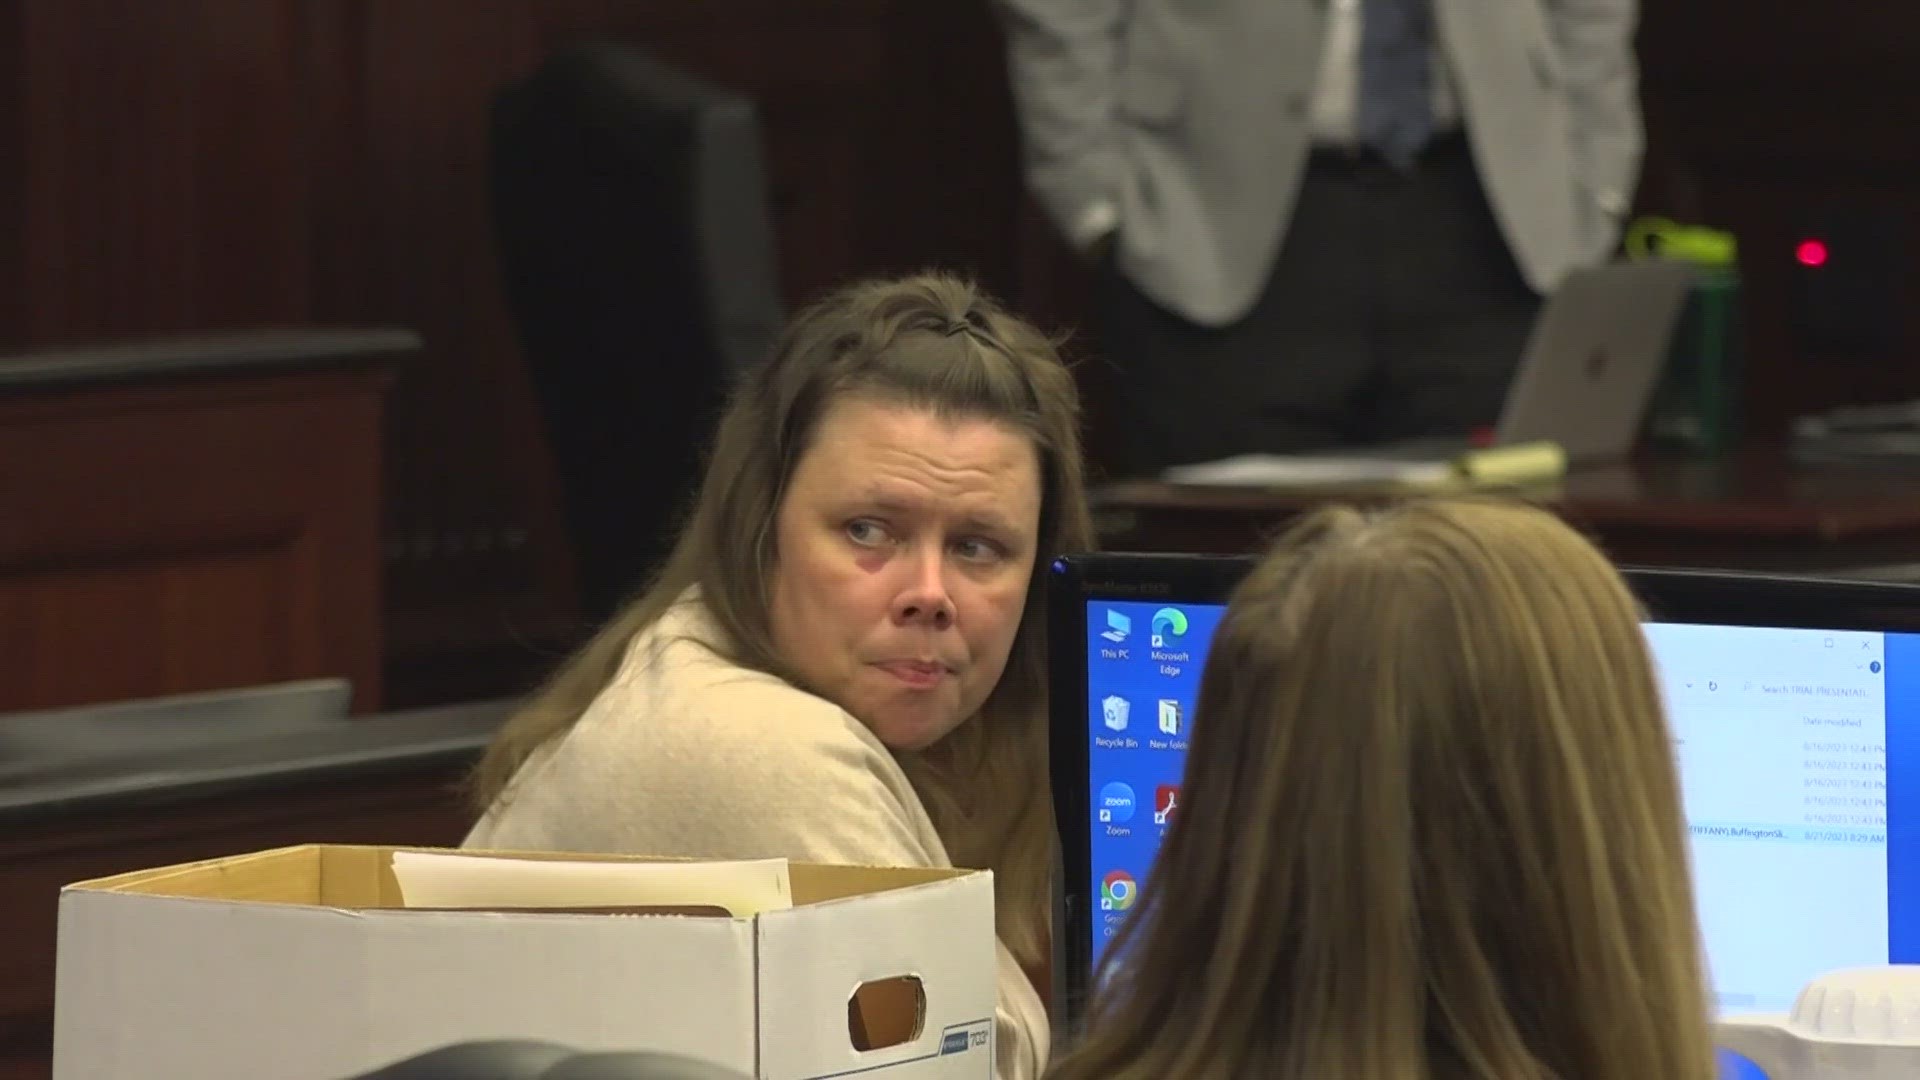 Tiffany Cole chose not to take the stand in her death penalty case, but complained that others didn’t come to her defense.